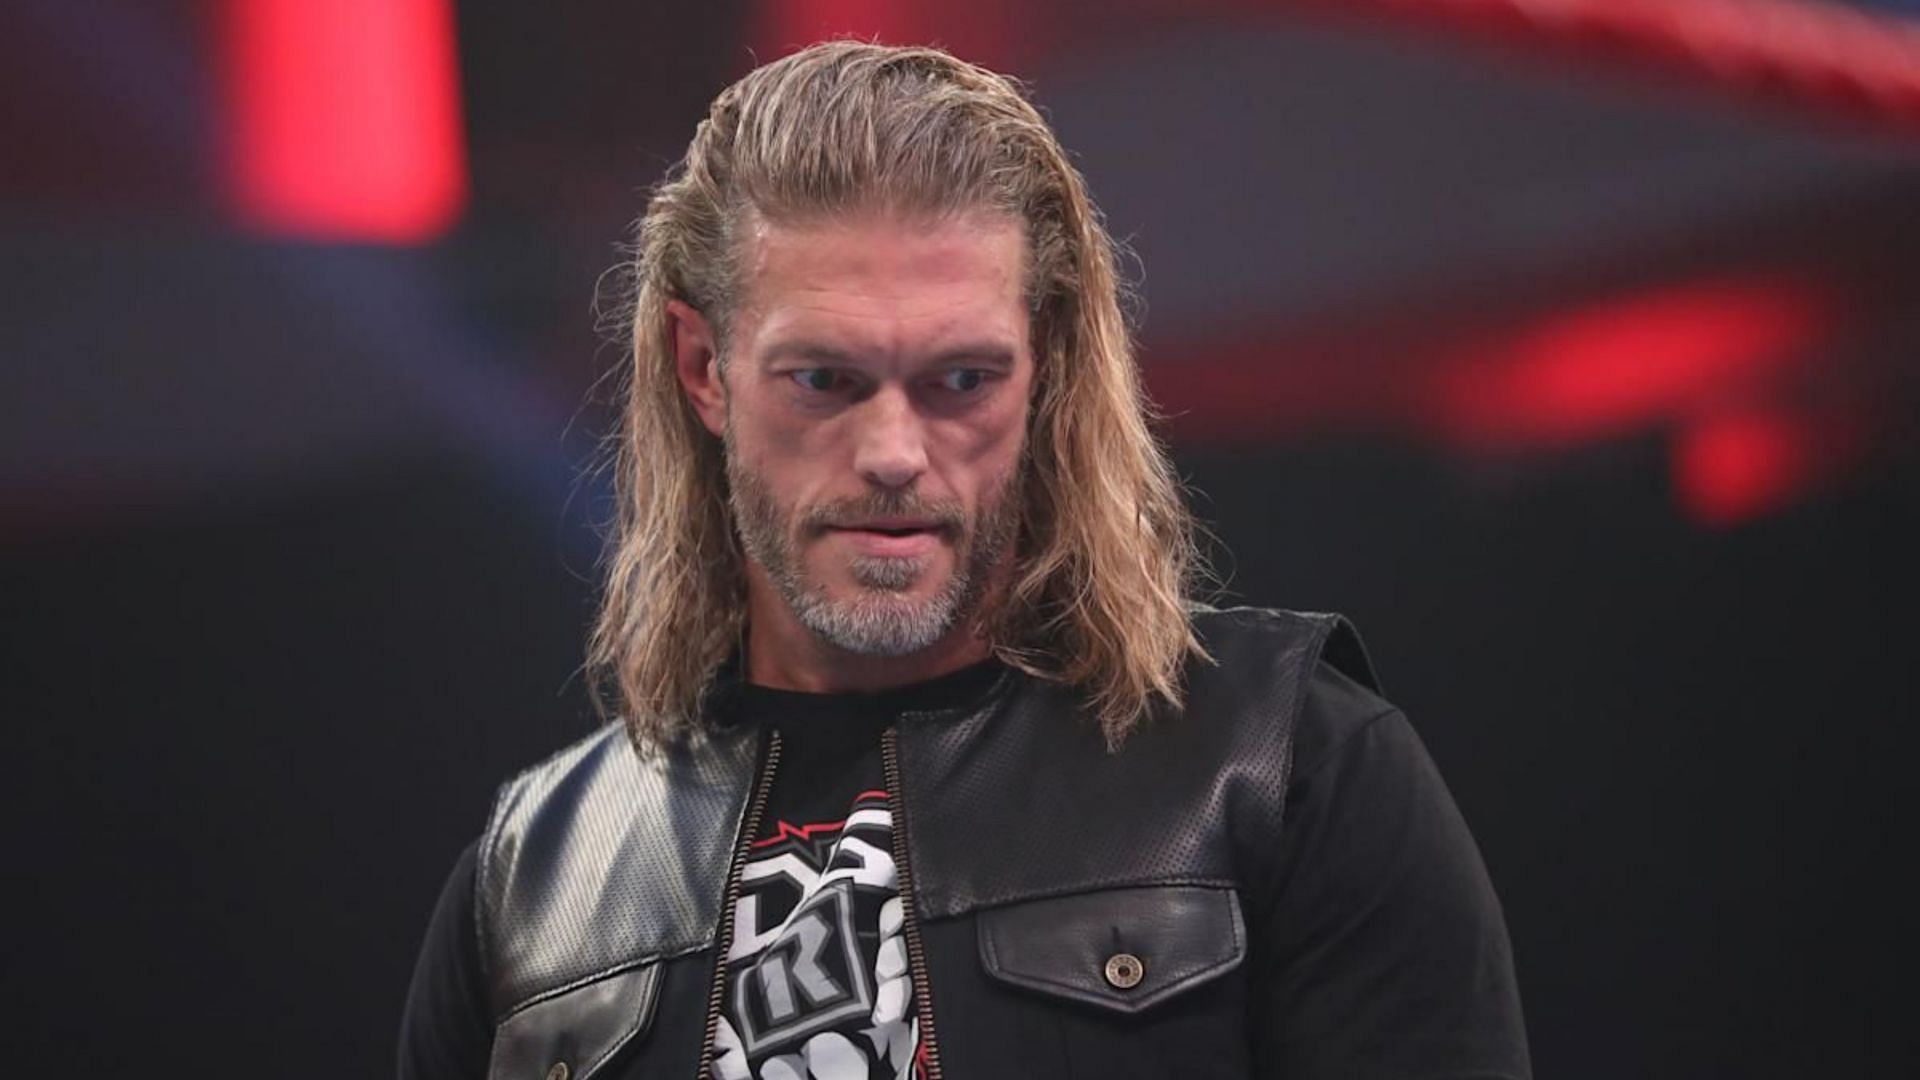 "That was the last thing to kind of check off" WWE Hall of Famer Edge